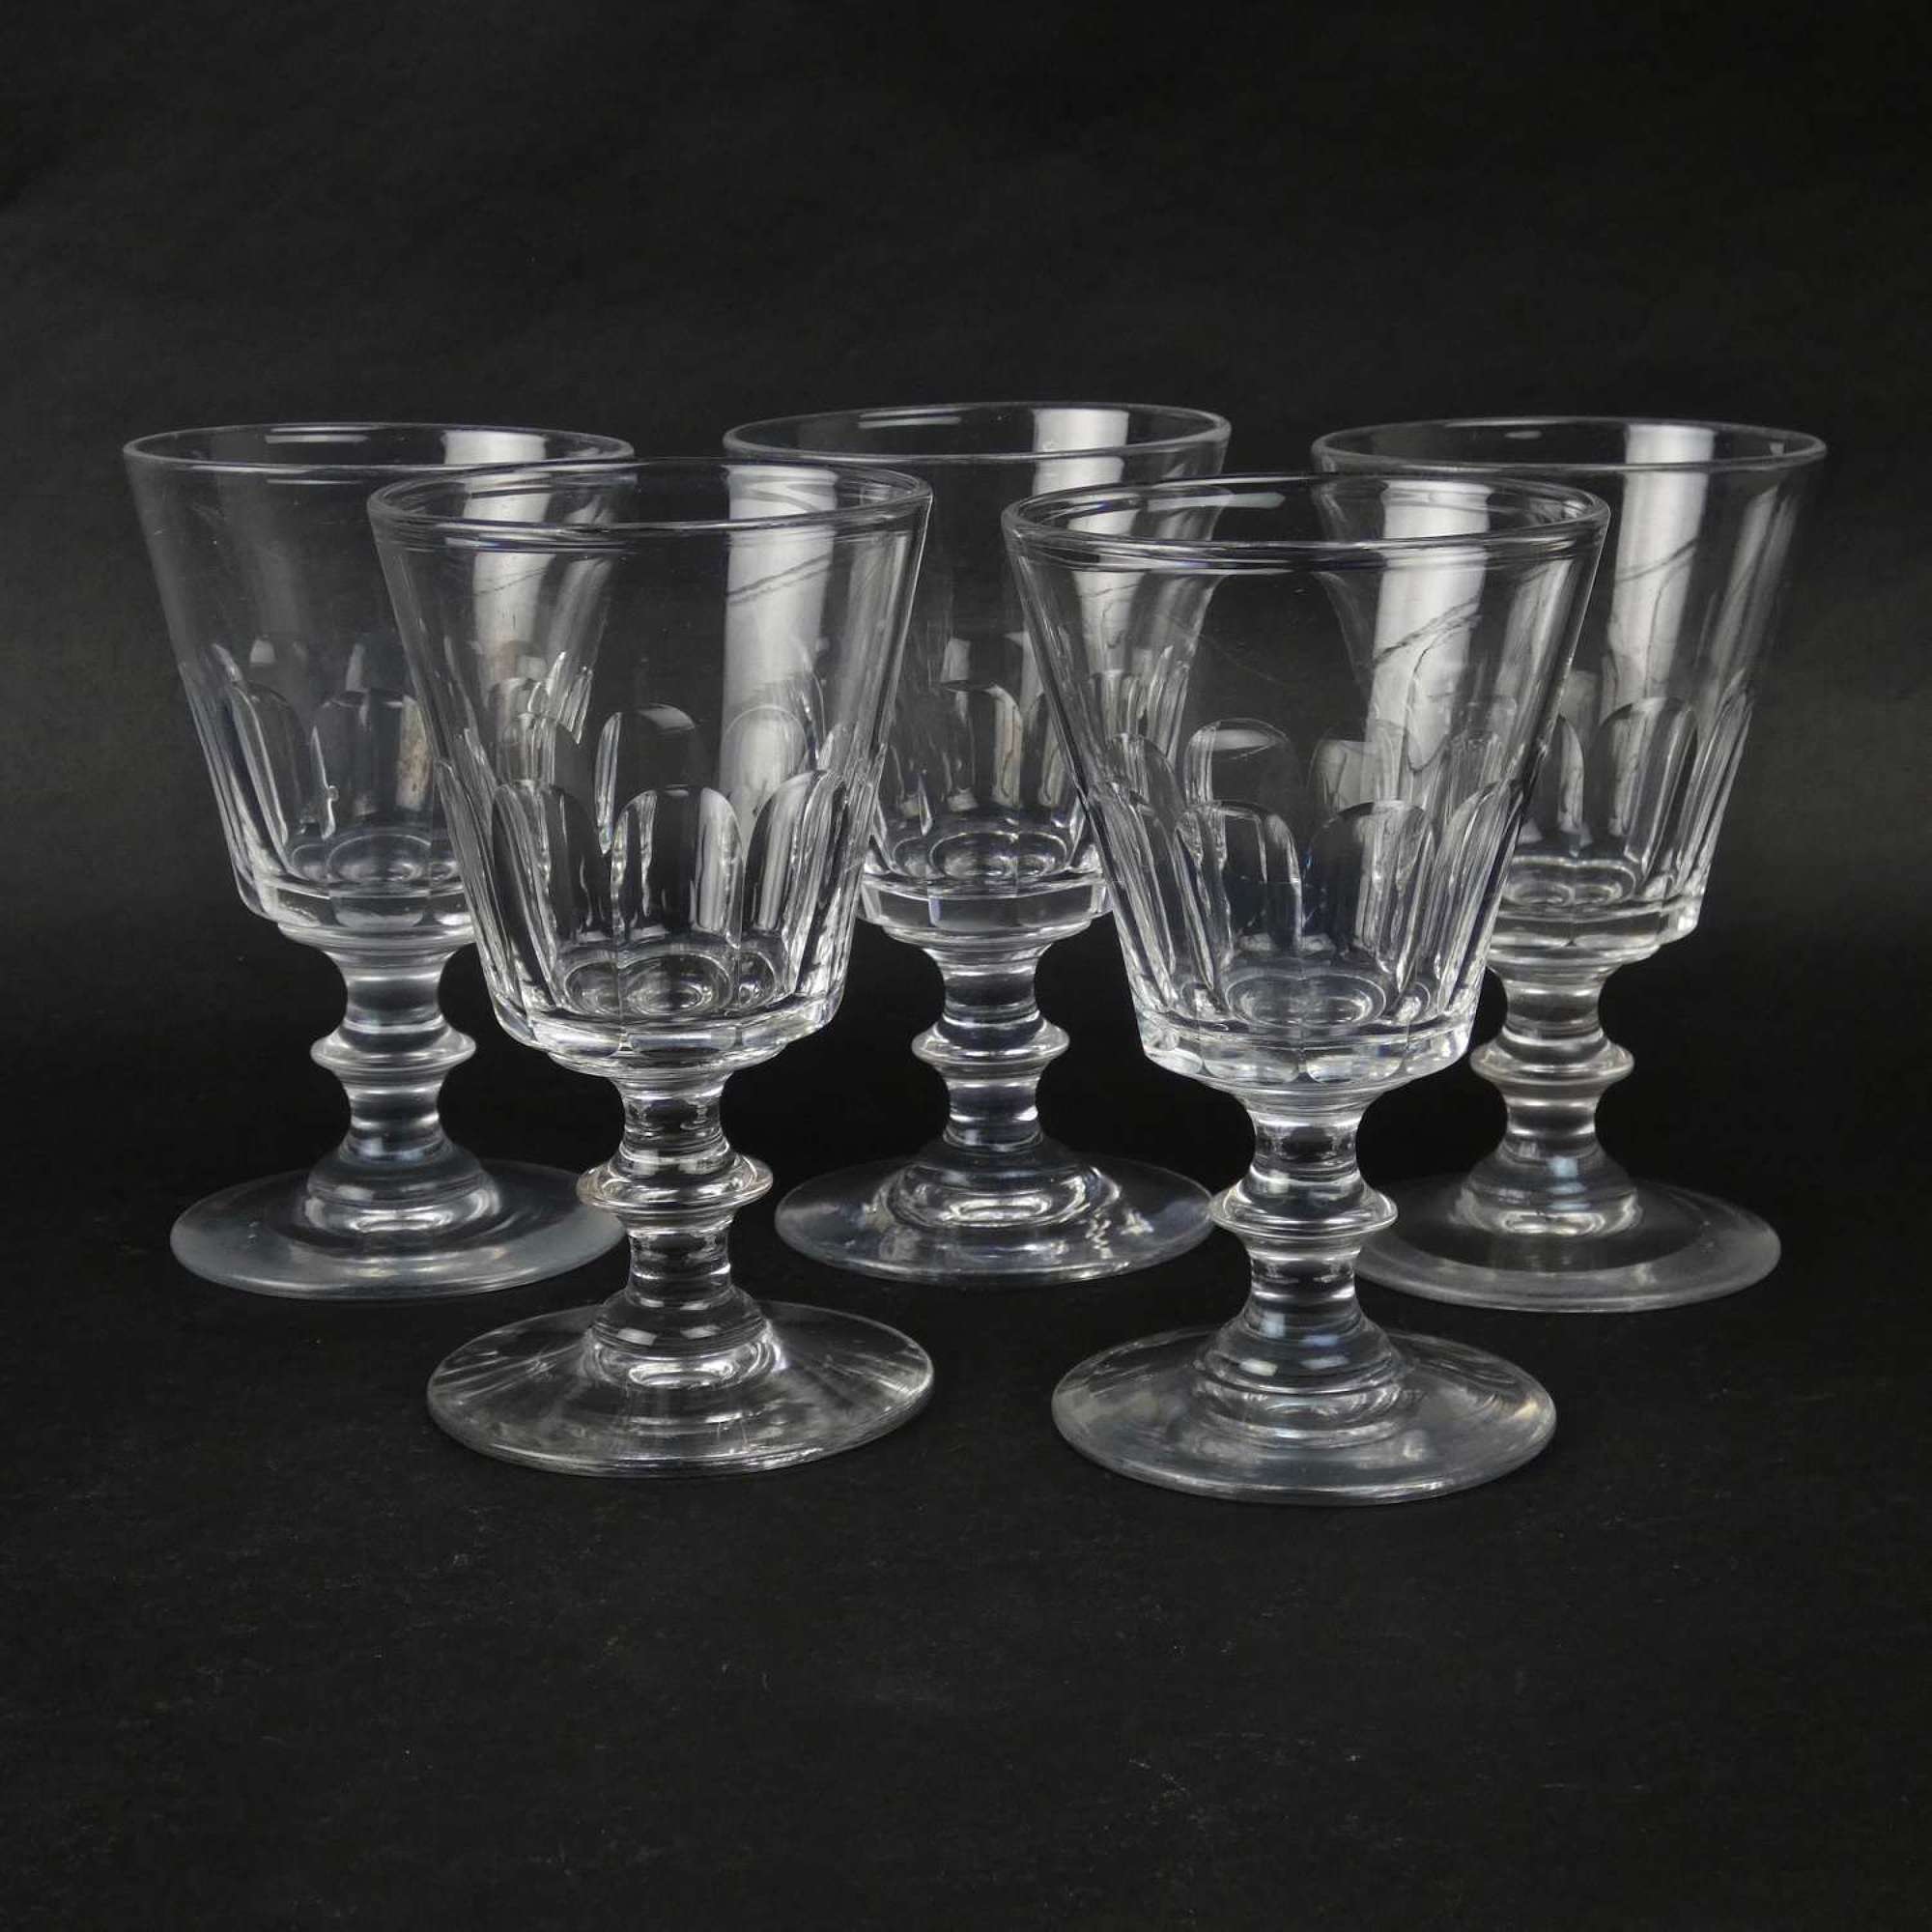 5 heavy, French crystal wine glasses